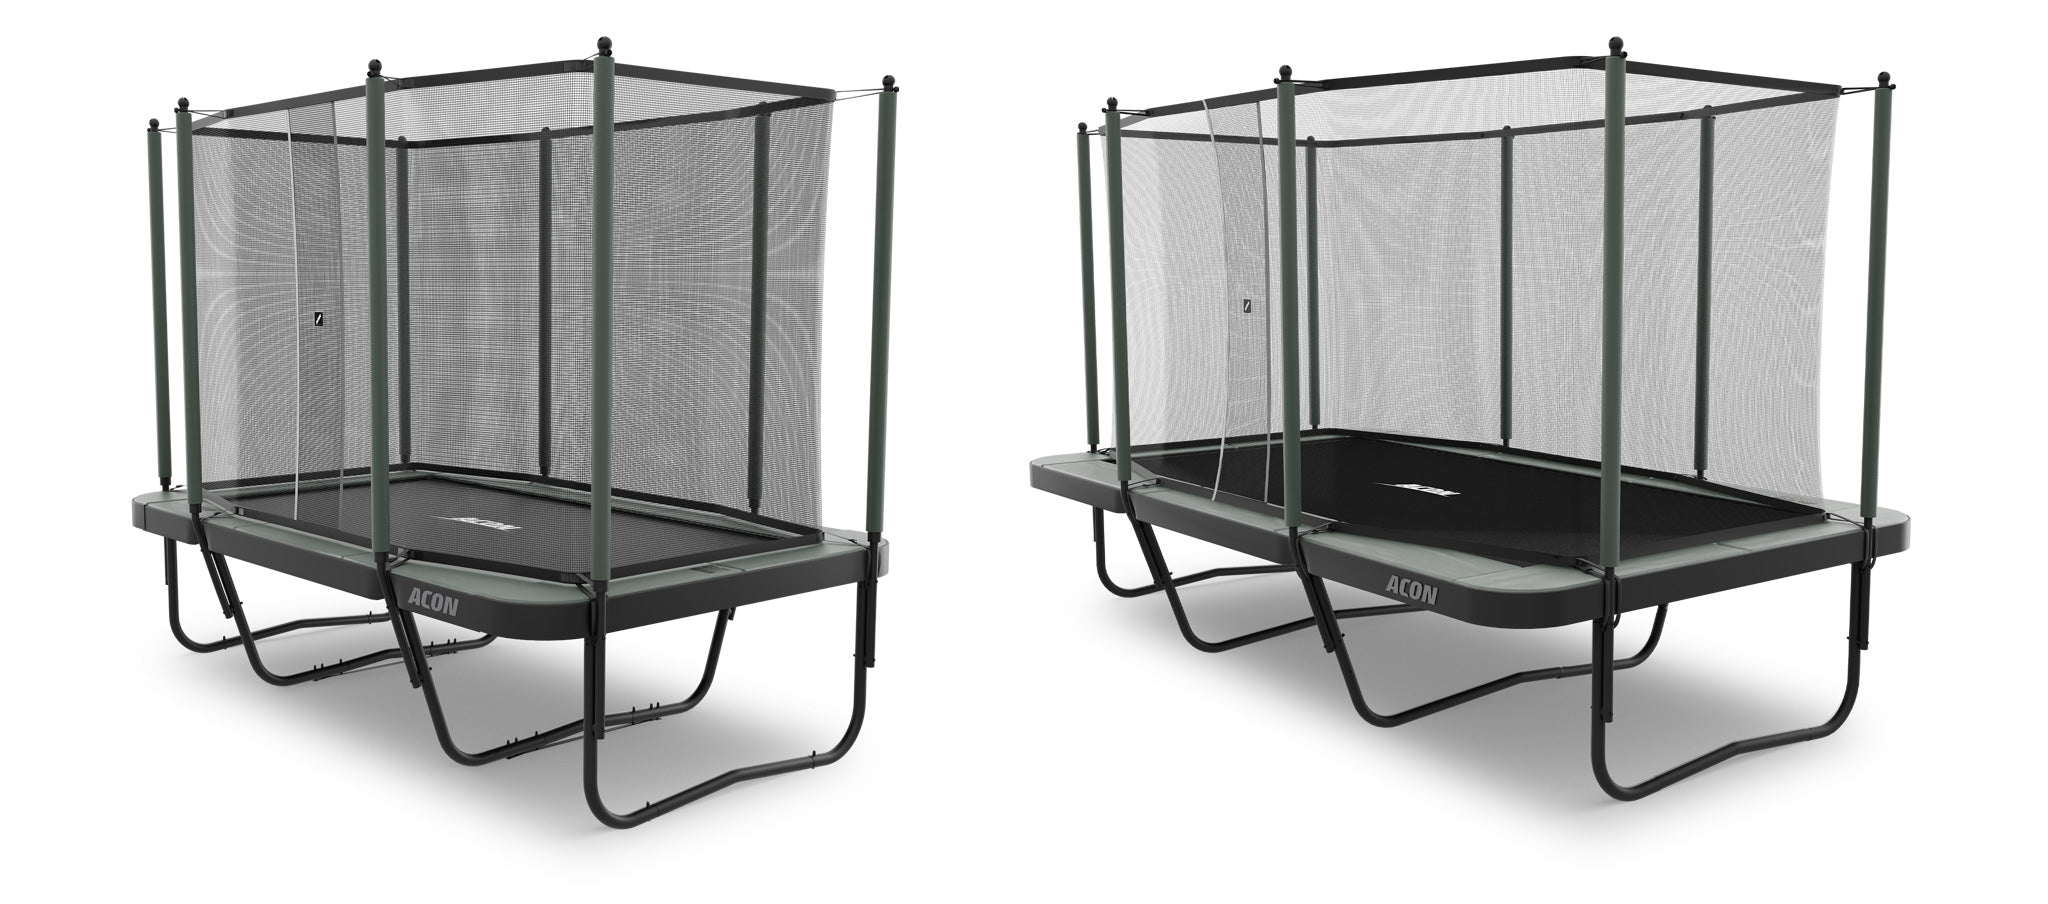 Two rectangular trampolines by ACON with Performance springs included. The left one is the smaller trampoline called 13 HD and the right one is ACON flagship trampoline 16 HD 